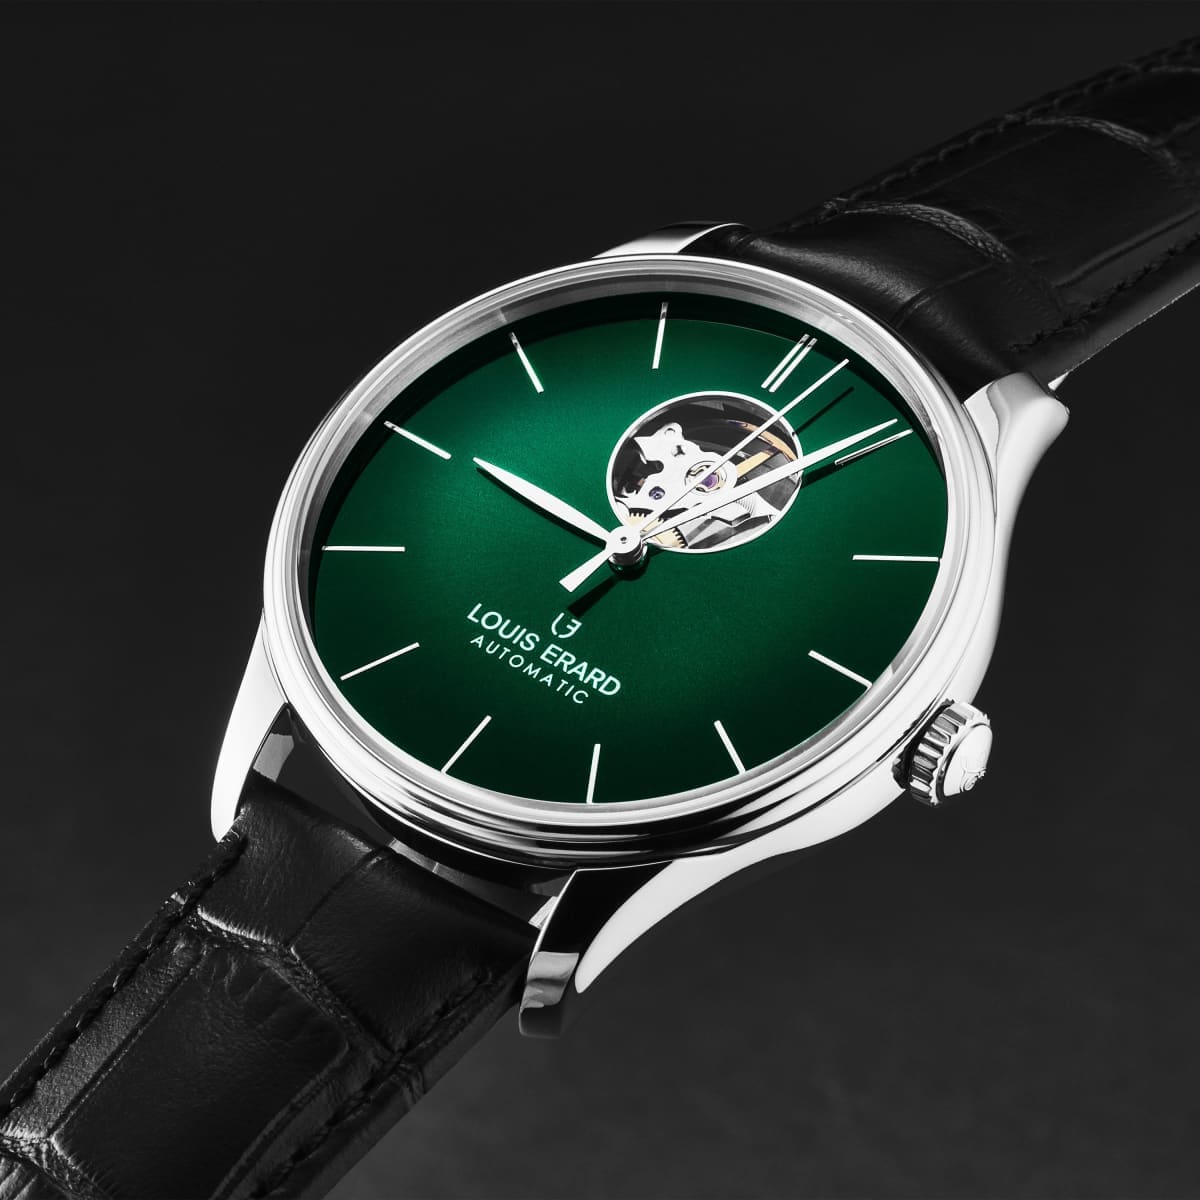 Louis Erard Men’s ’Heritage’ Green/Black Dial Black Leather Strap Automatic Watch 60287AA89.BAAC82 - On sale